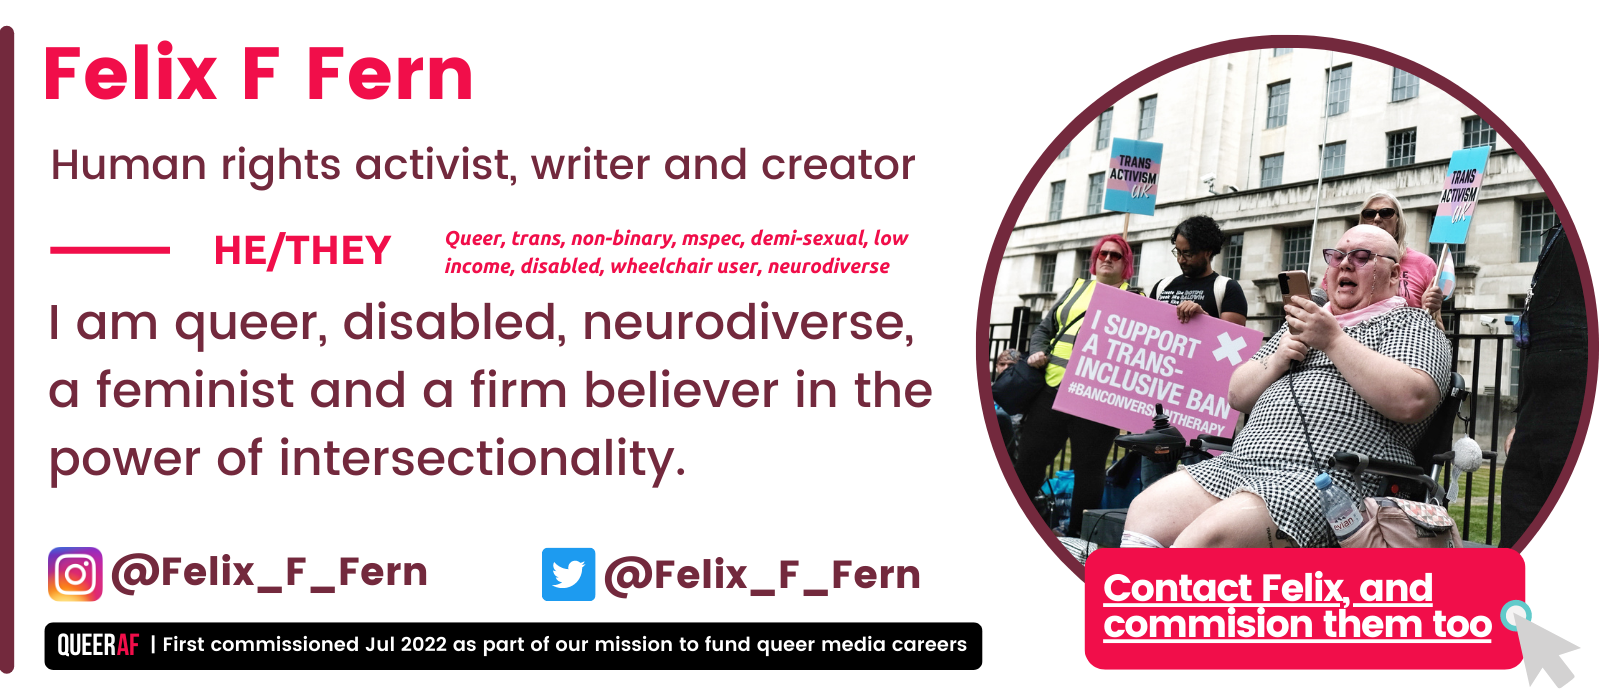 I am queer, disabled, neurodiverse, a feminist and a firm believer in the power of intersectionality. He/They Felix F Fern Human rights activist, writer and creator Queer, trans, non-binary, mspec, demi-sexual, low income, disabled, wheelchair user, neurodiverse